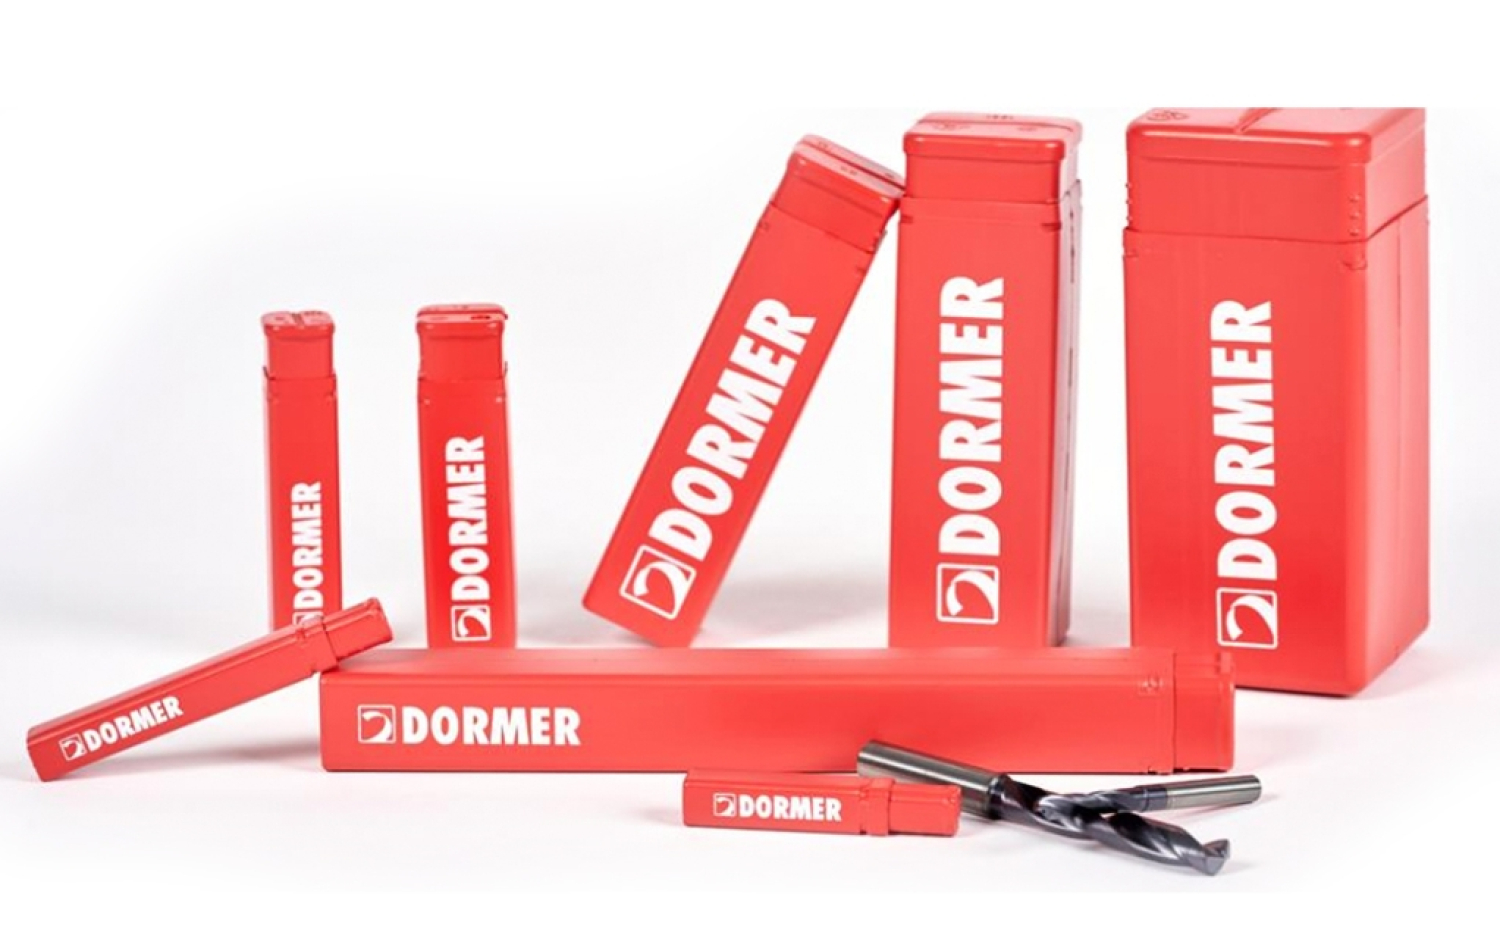 Dormer Pramet introduced packaging for its products made of recycled material